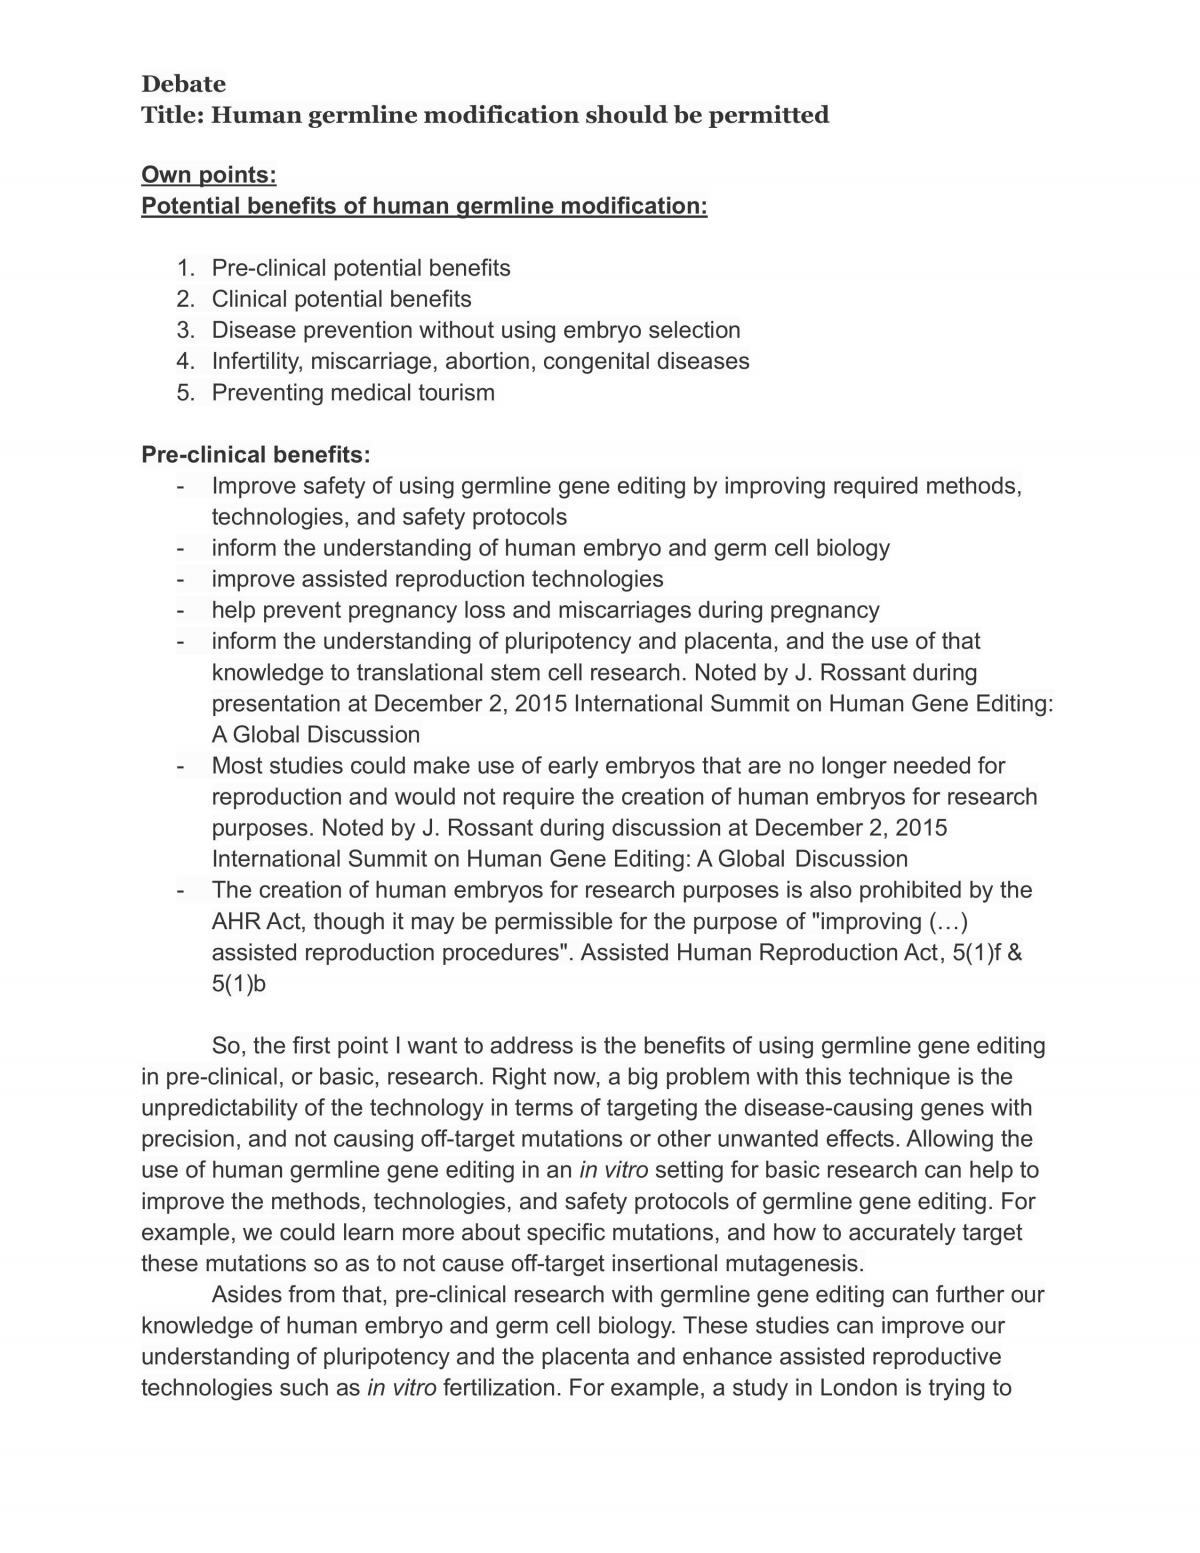 Term Project Debate - Human germline modification should be permitted - Page 1